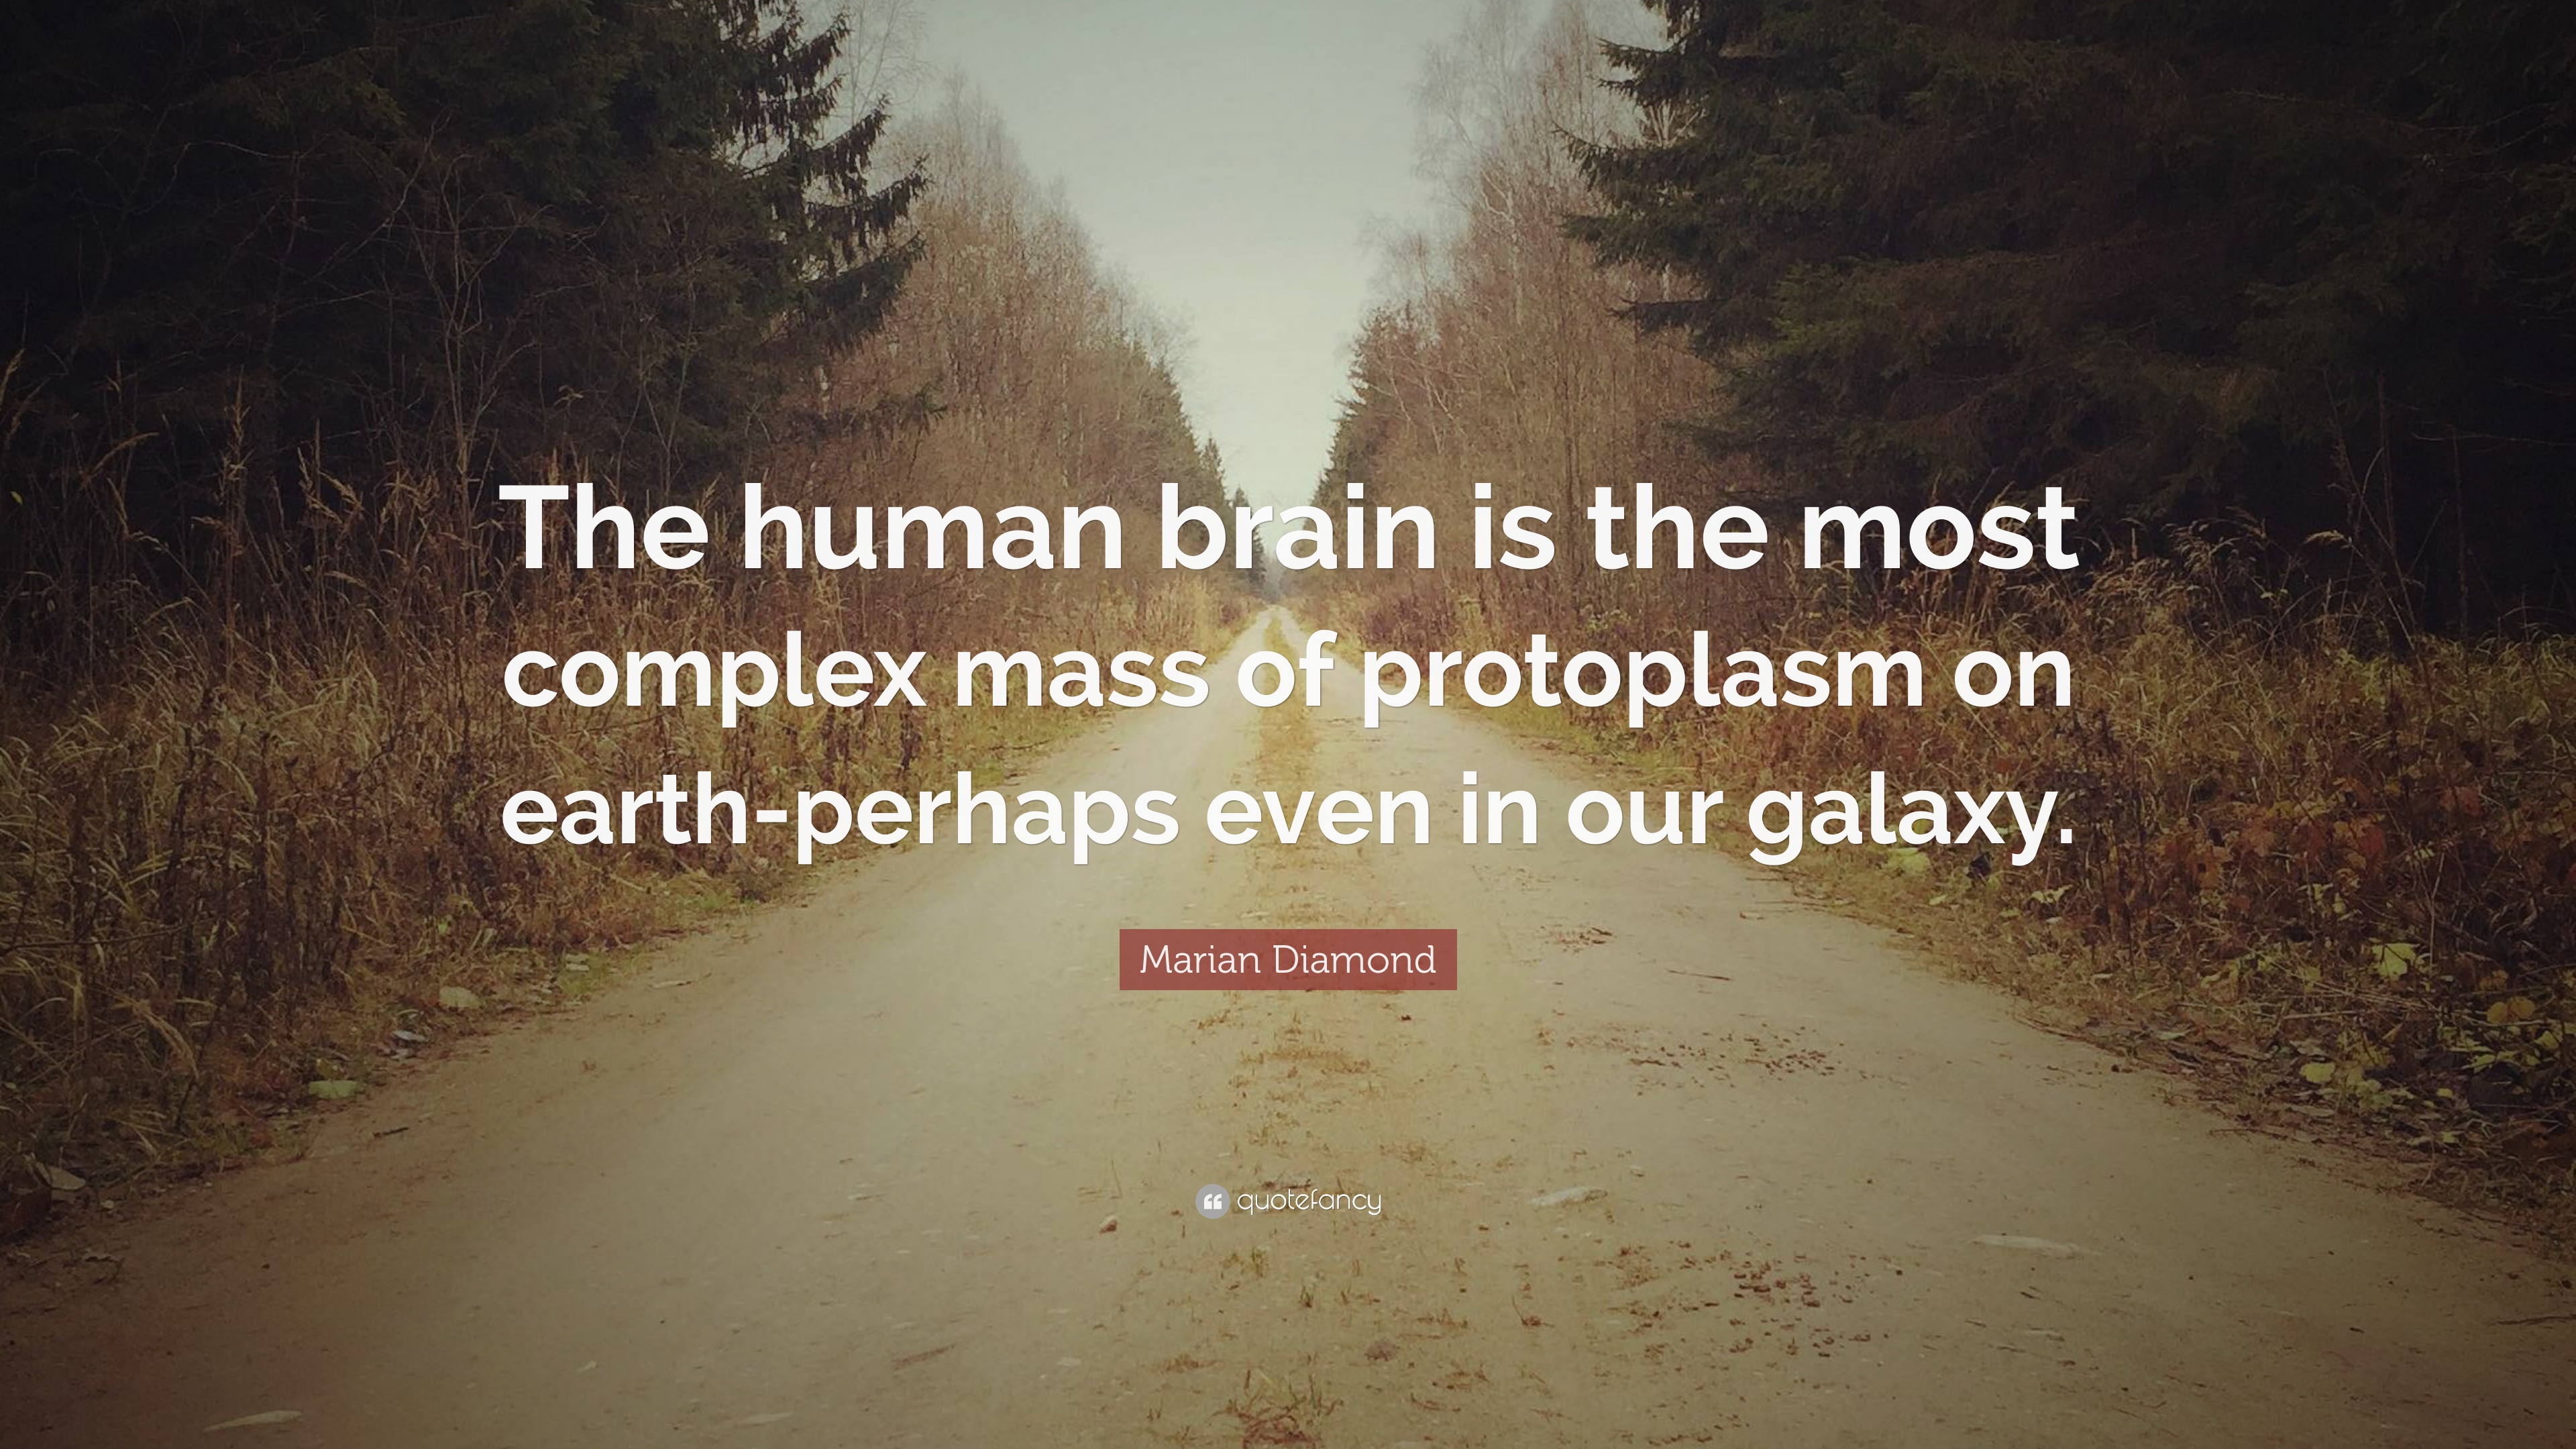 the human brain is the most complex mass of protoplasm on earth-perhaps even in our galaxy. marian diamond